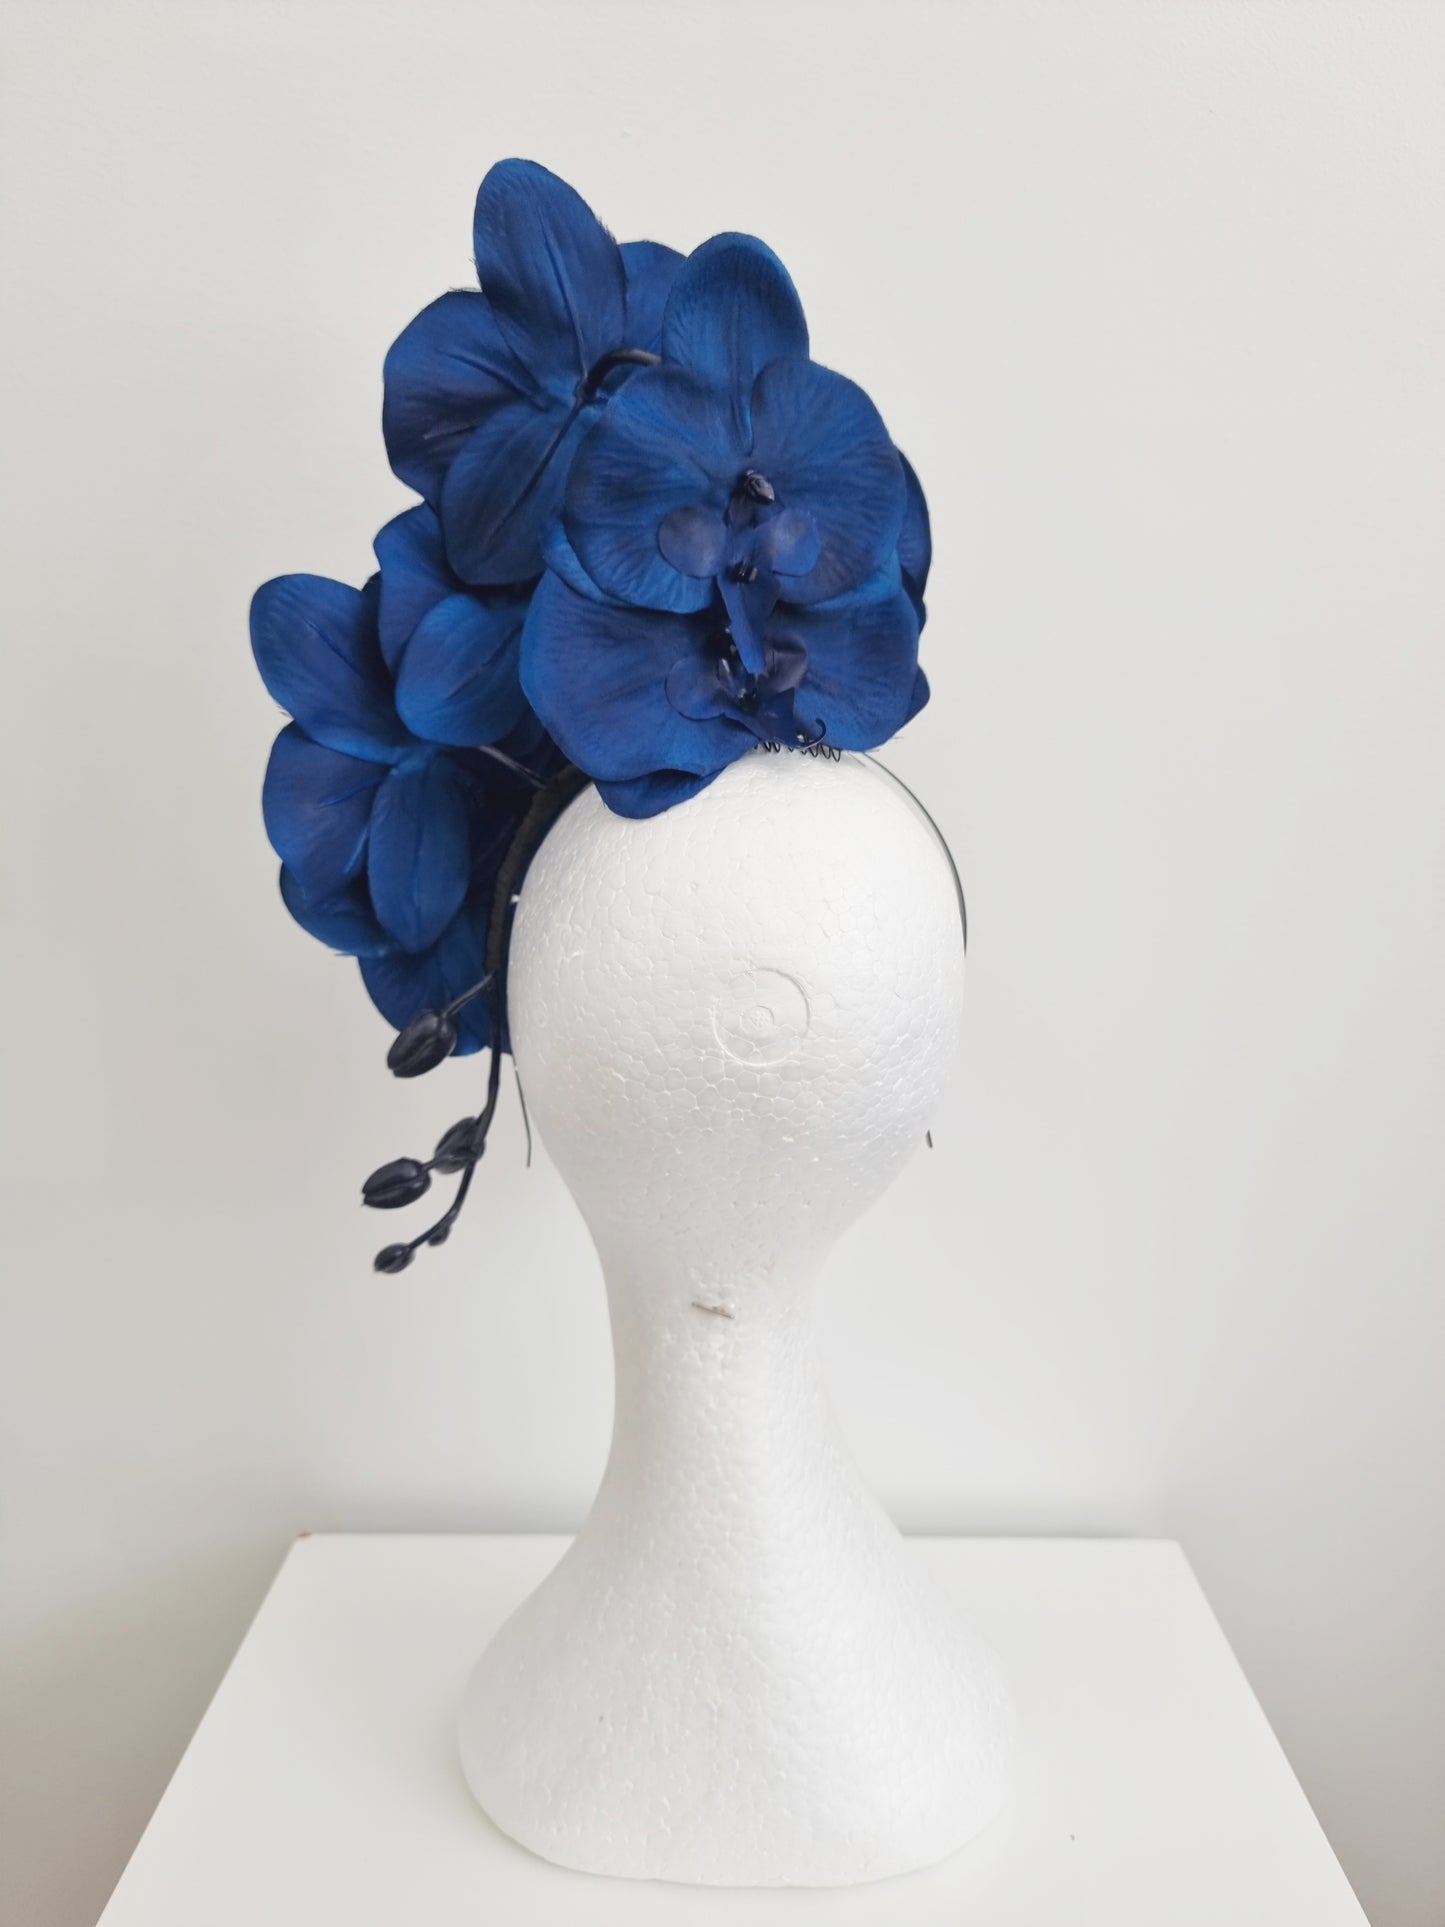 Miss Alexia womens faux orchid flower headband fascinator in Navy Blue